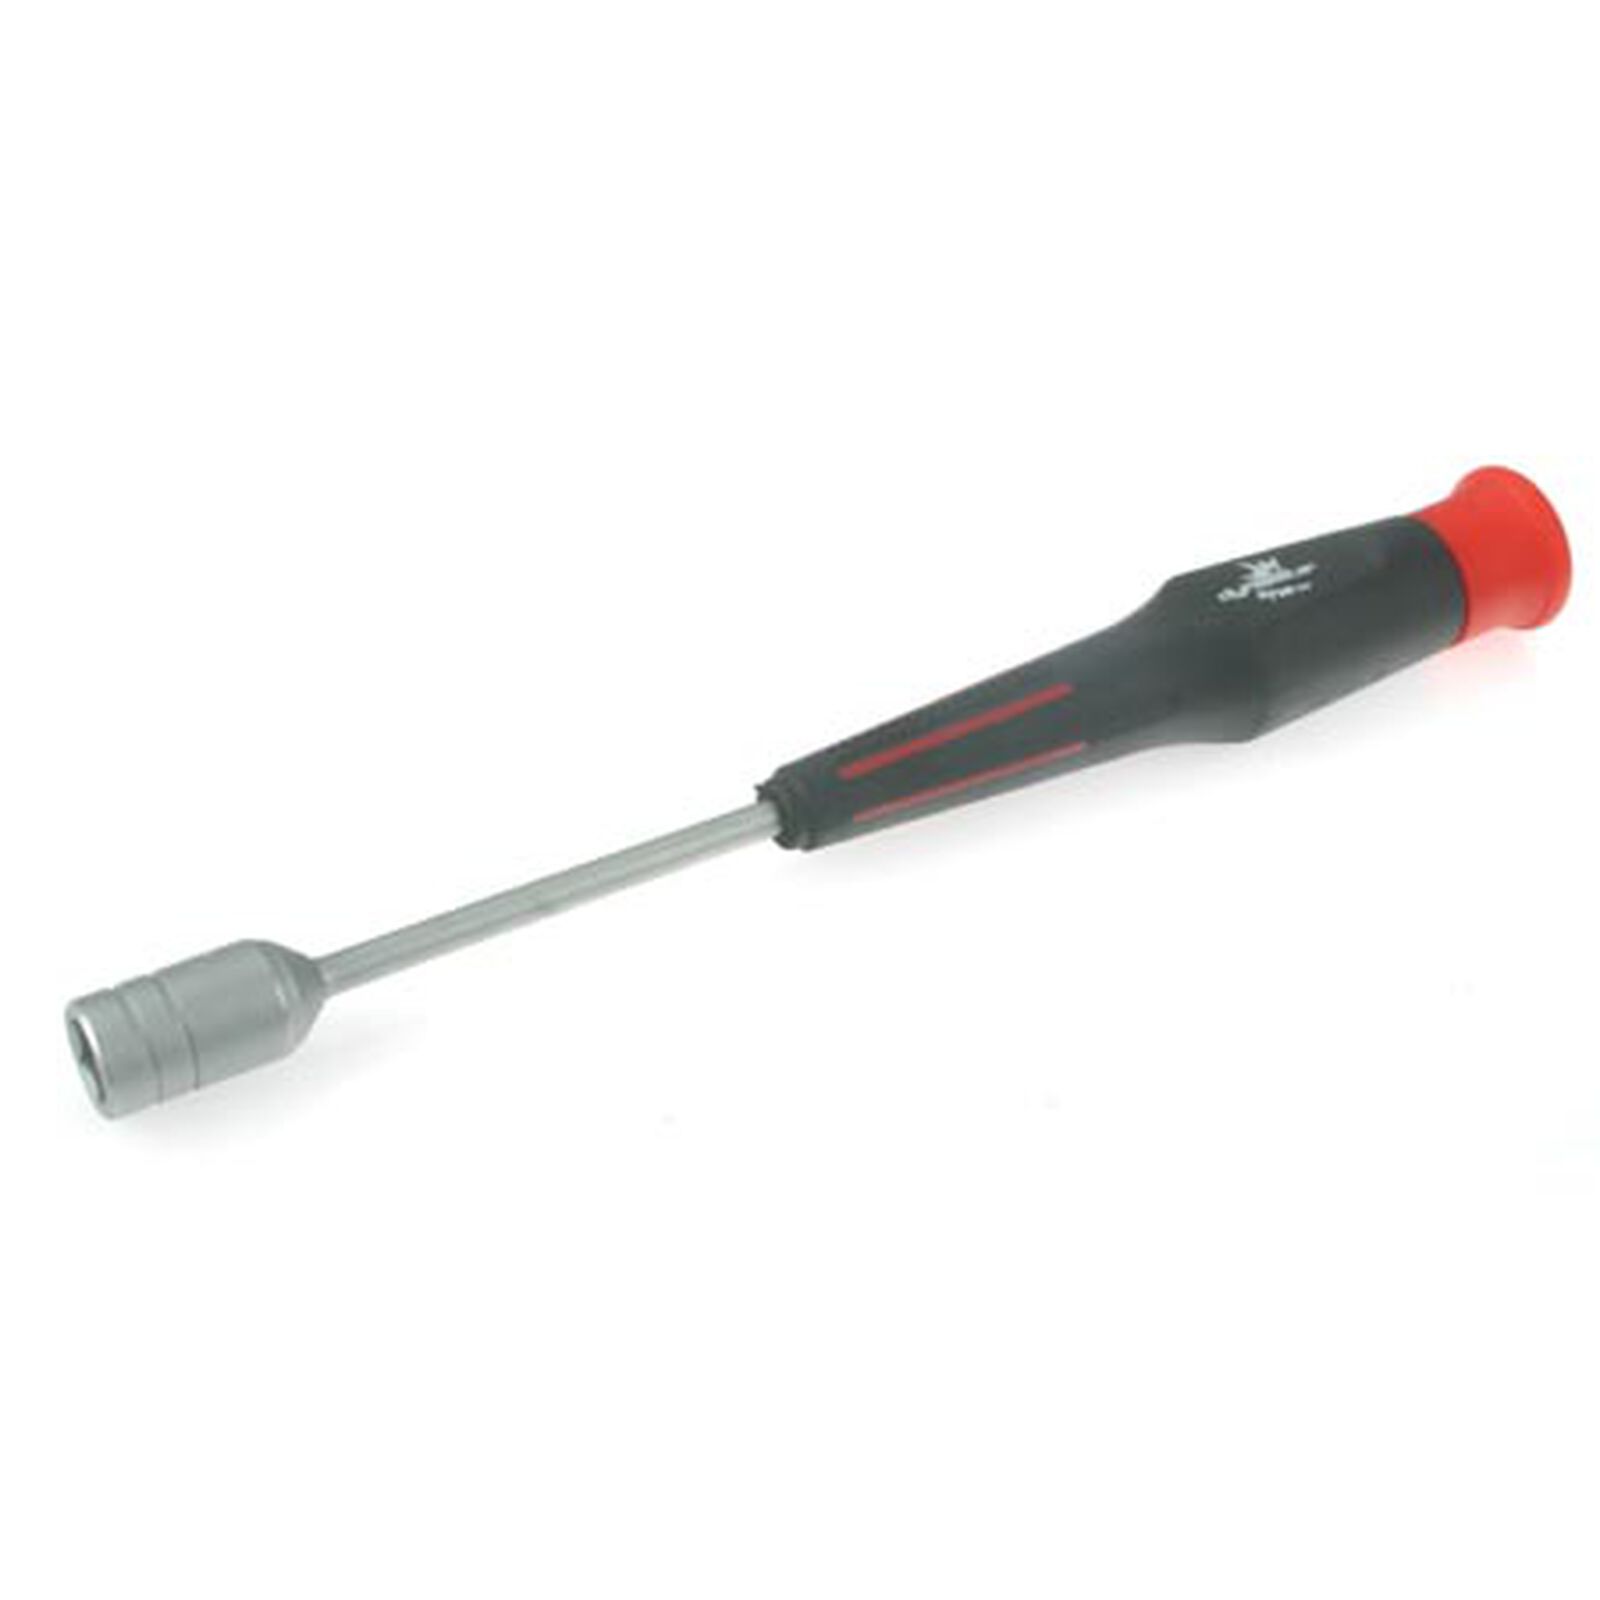 Nut Driver: 1/4"